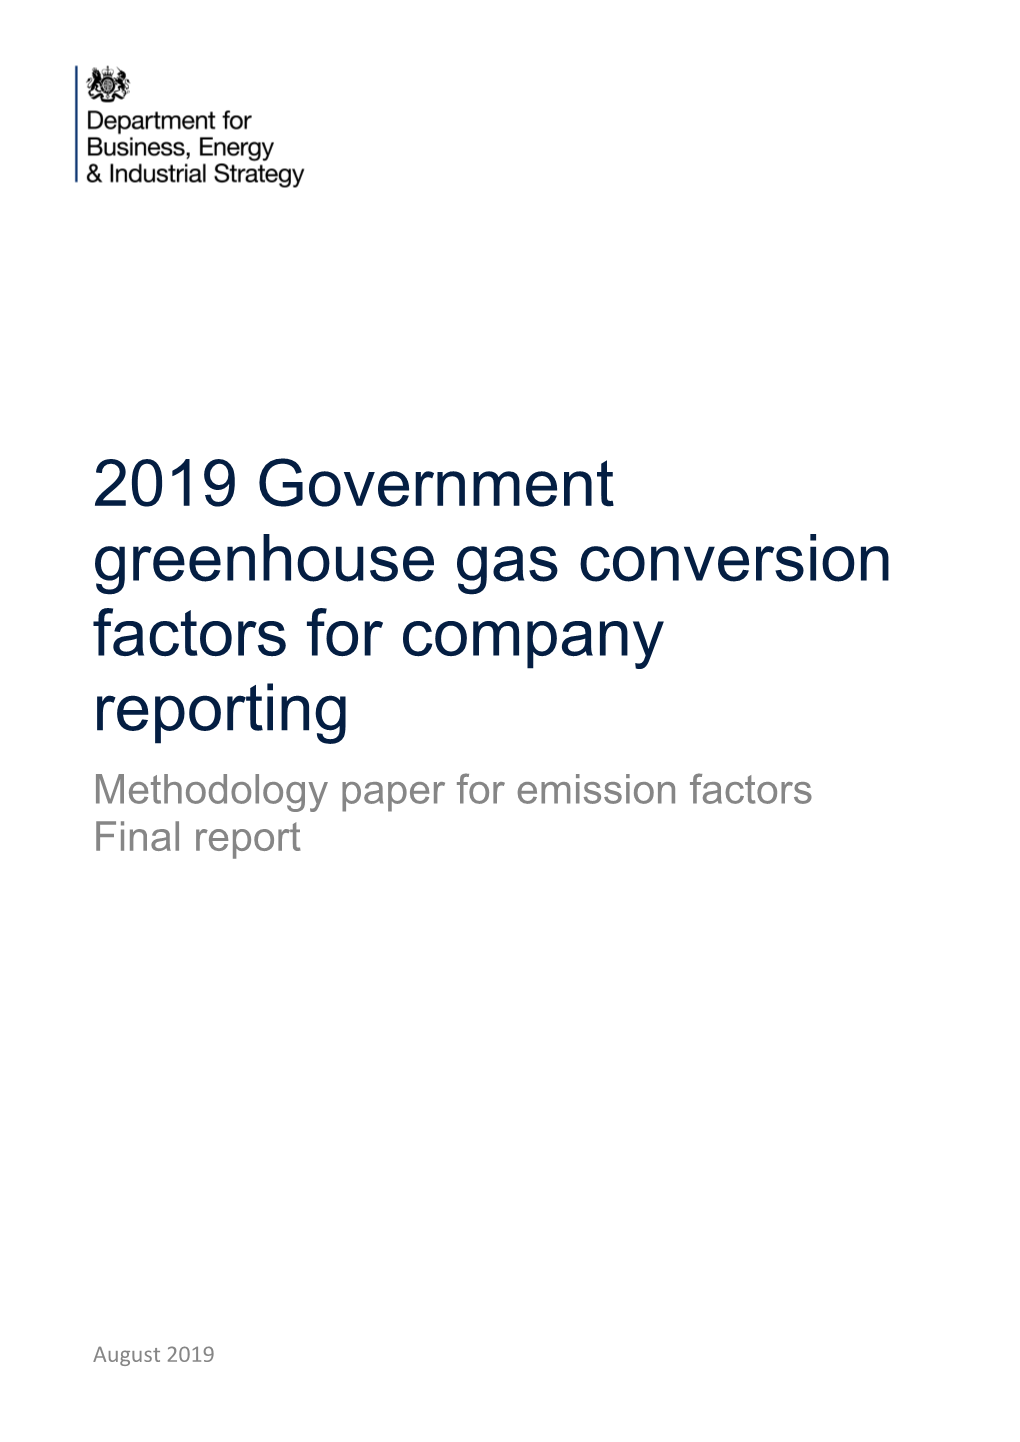 2019-government-greenhouse-gas-conversion-factors-for-company-reporting